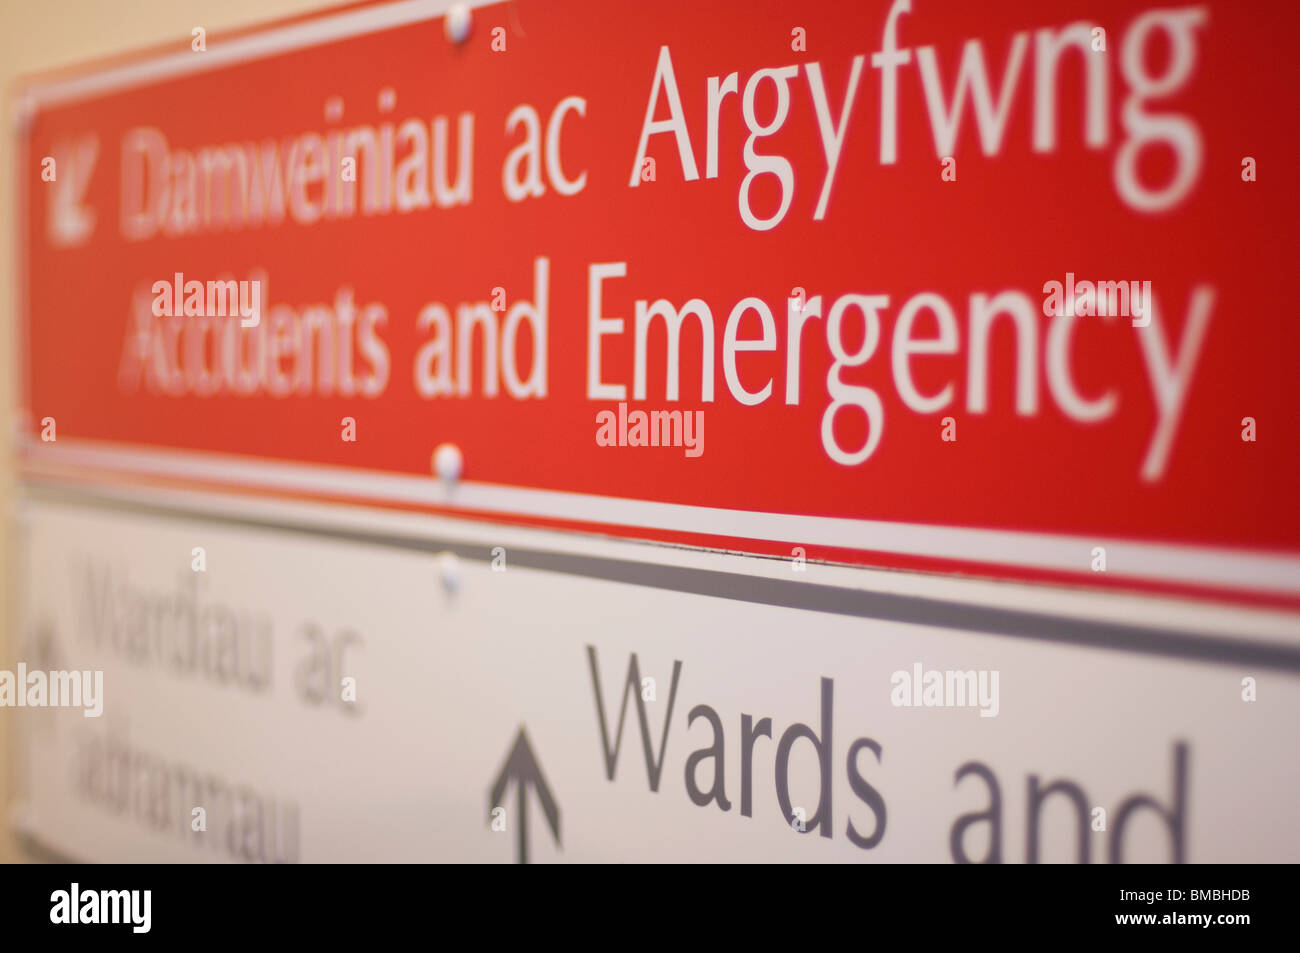 A sign for accidents and emergency in Aberystwyth Bronglais hospital, shot with a shallow depth of field. Stock Photo